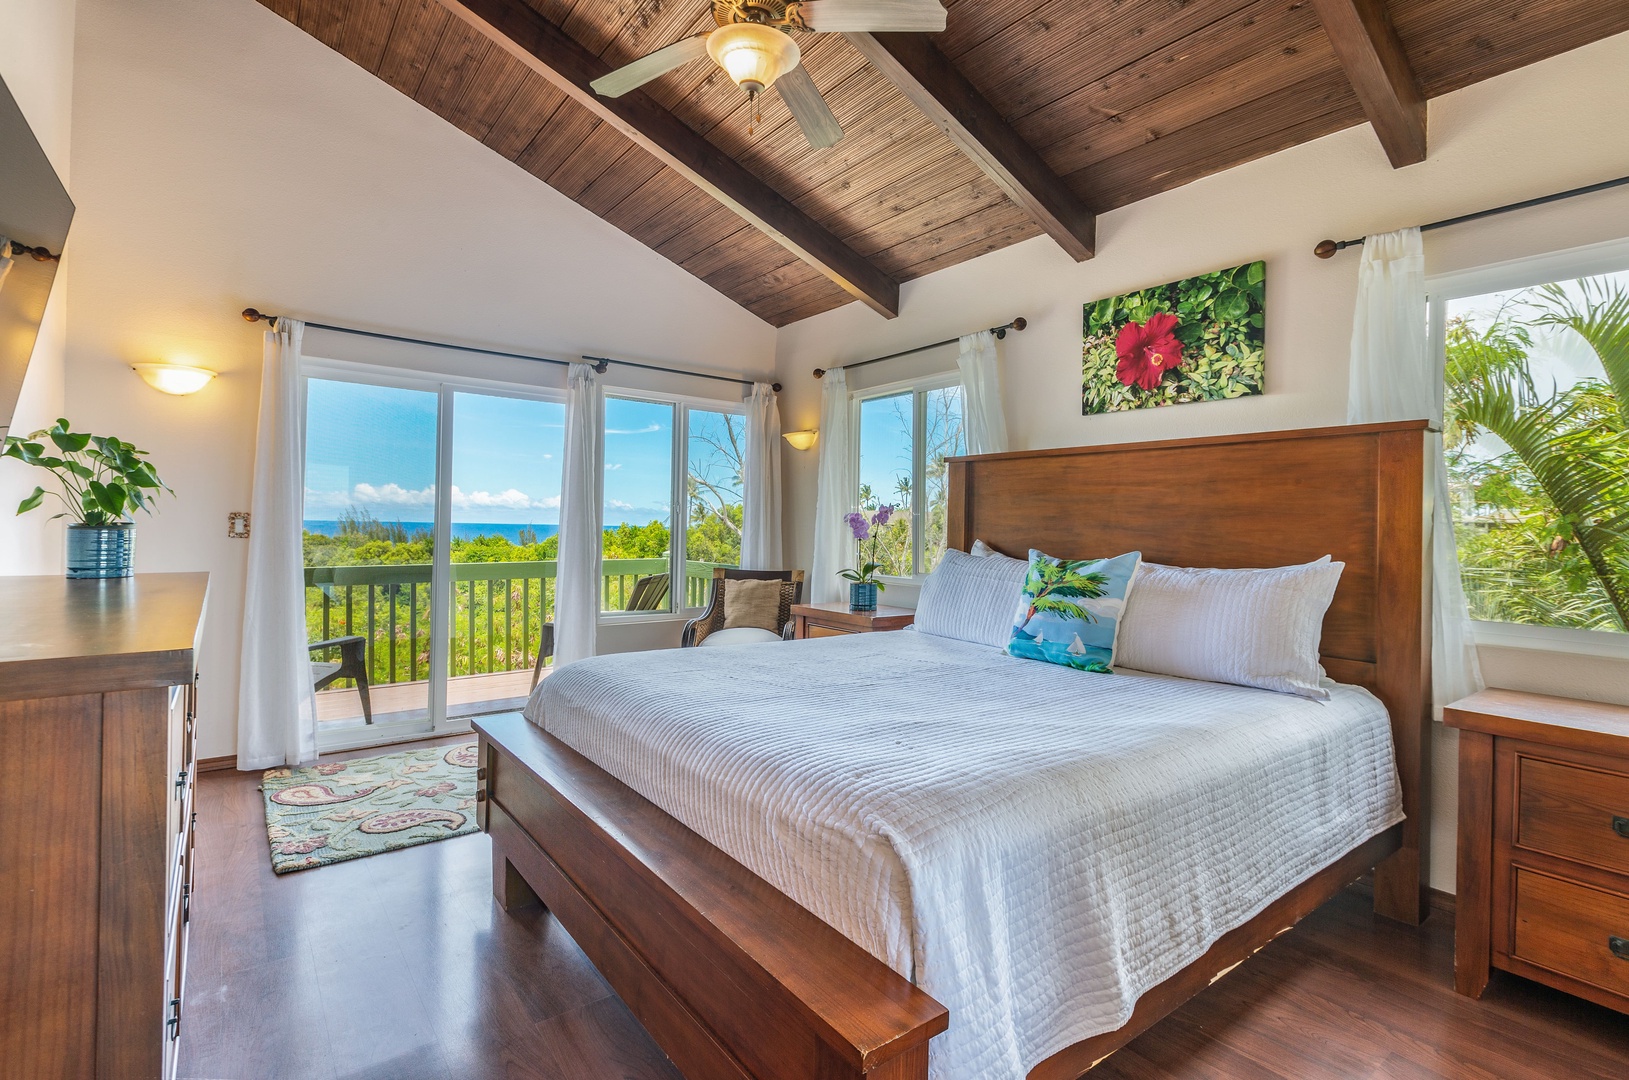 Princeville Vacation Rentals, Hale Ohia - The Primary Bedroom has direct access to the deck with stunning ocean views